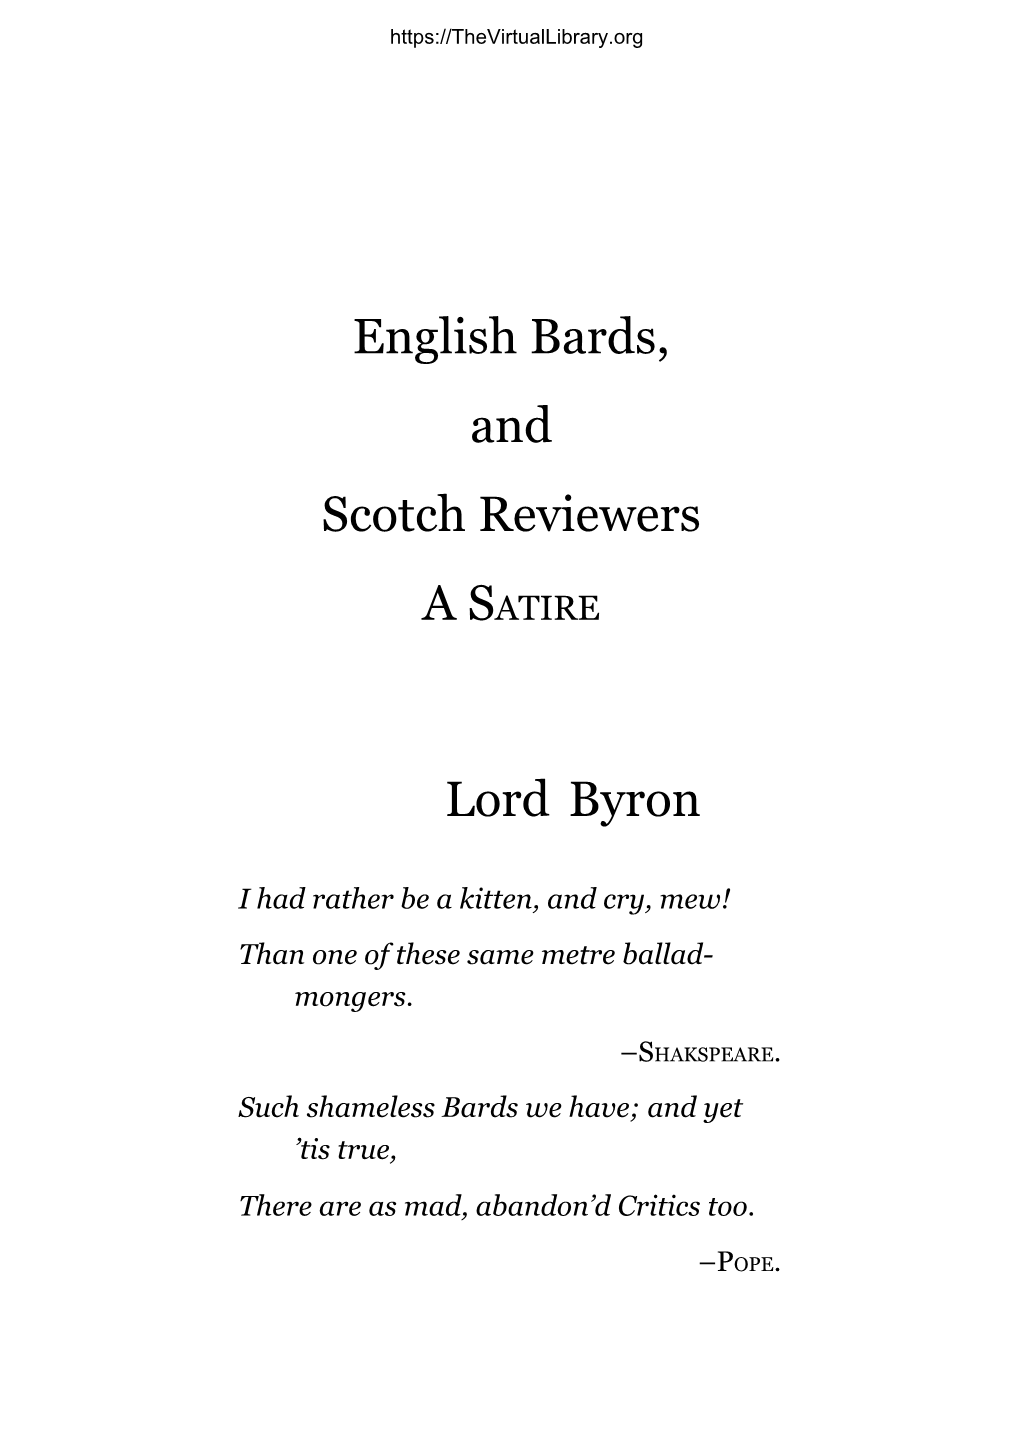 English Bards, and Scotch Reviewers’ Did Not Appear Till March, 1809